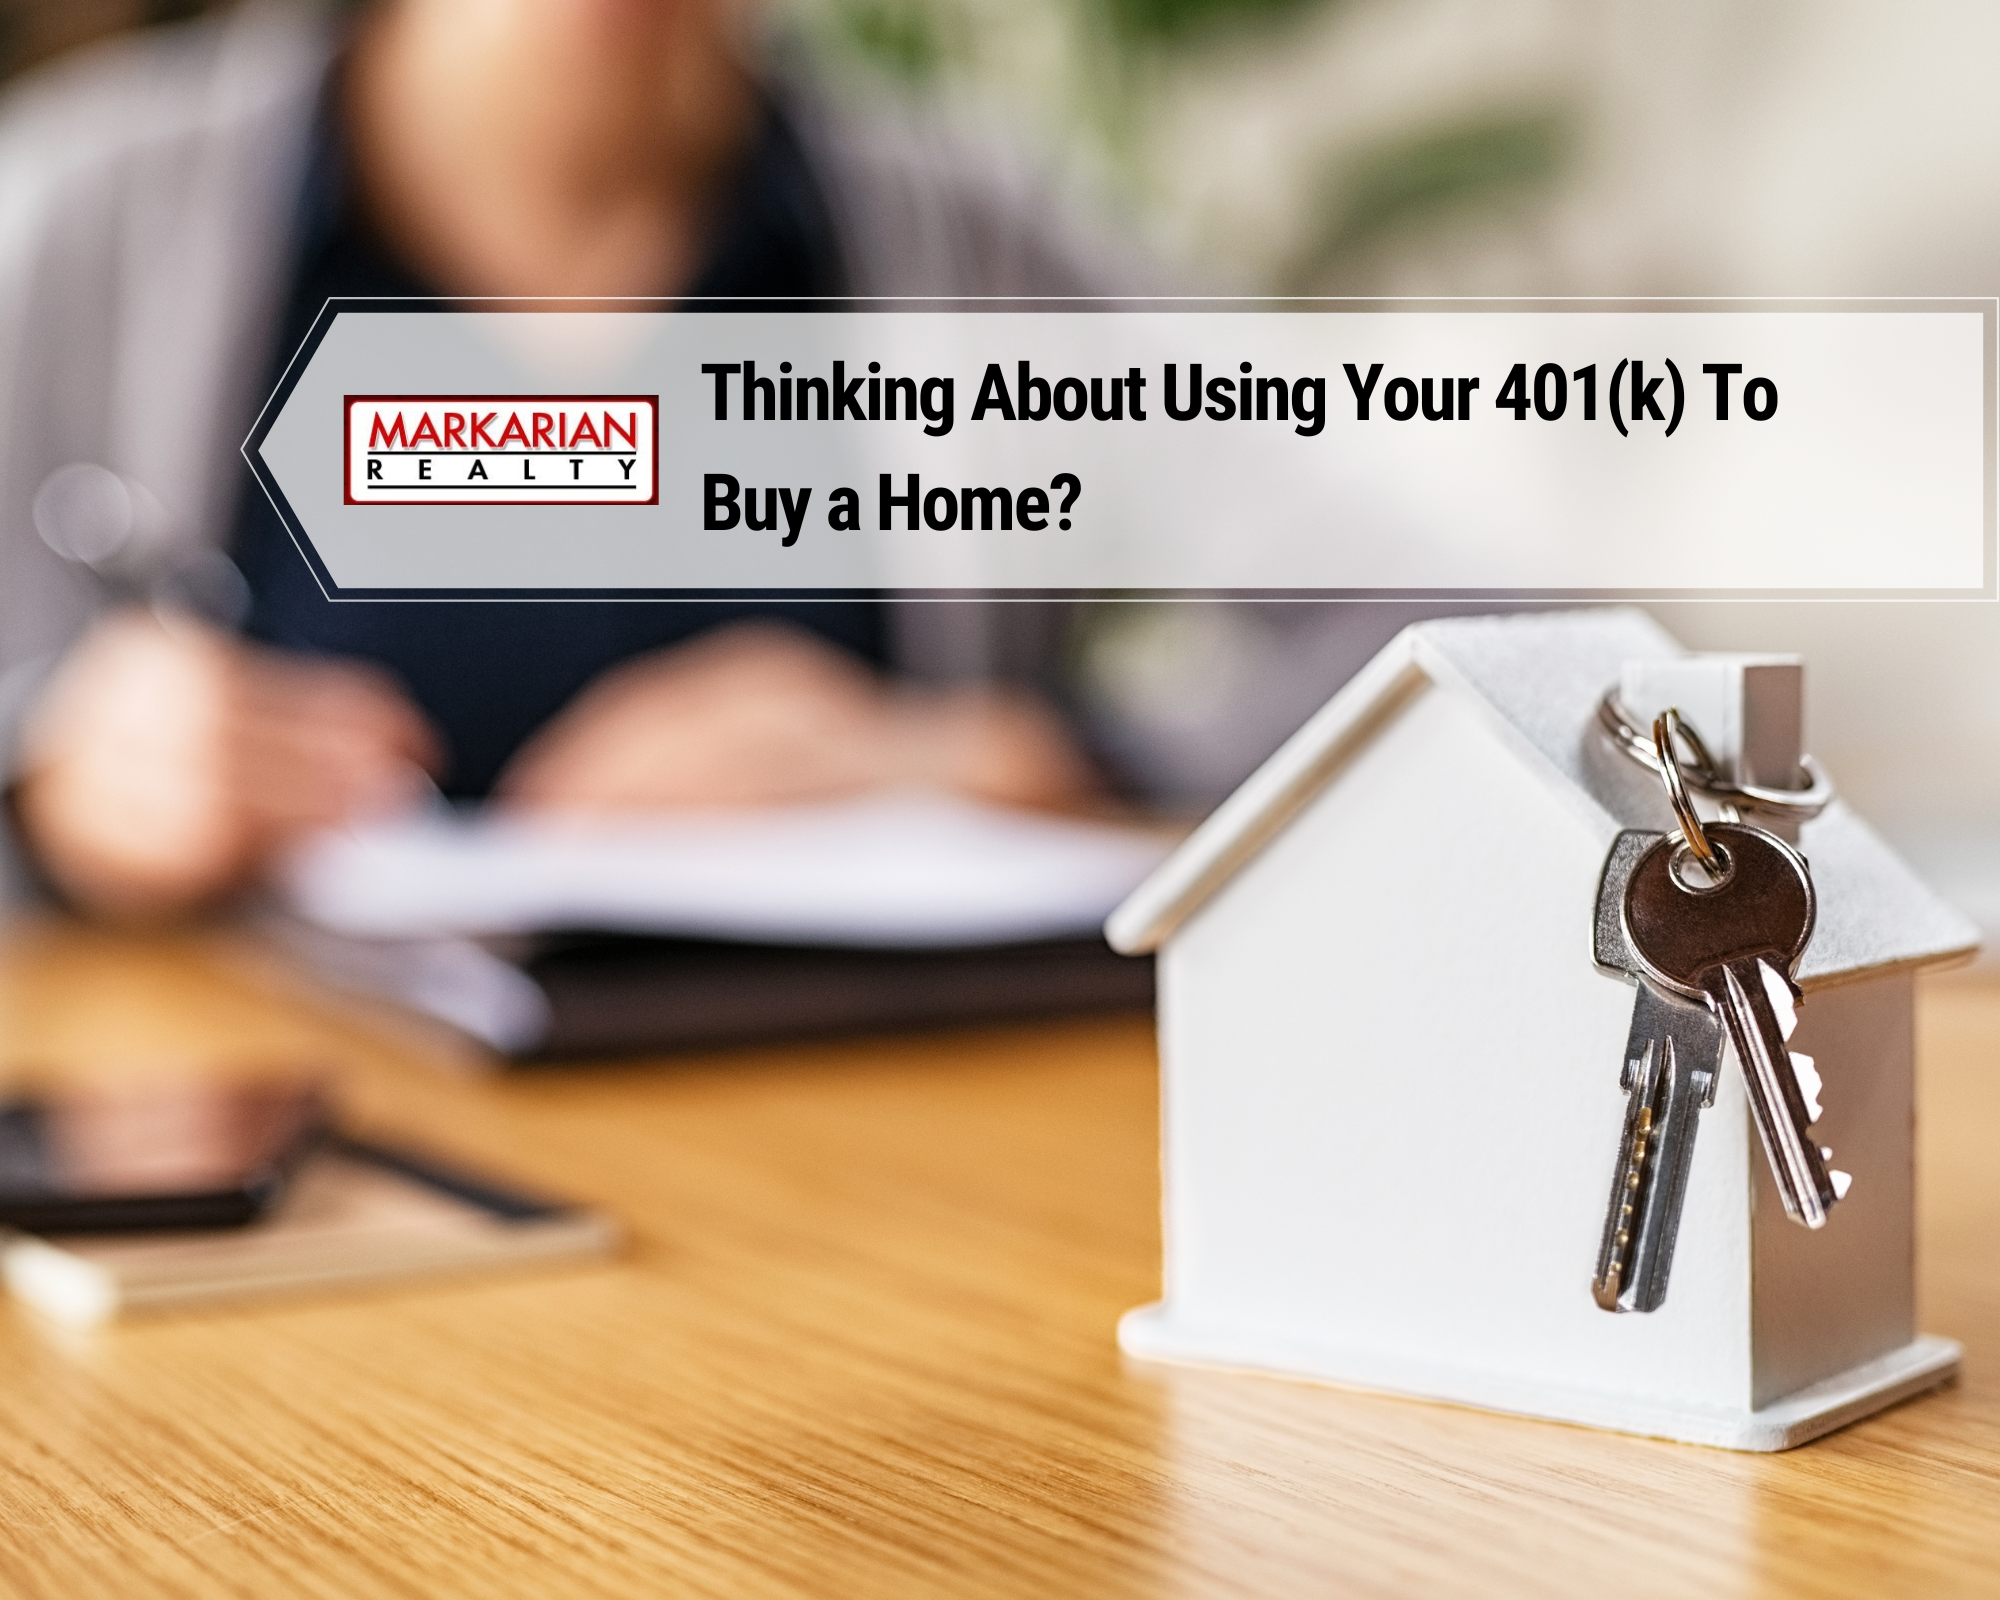 Thinking About Using Your 401(k) To Buy a Home?